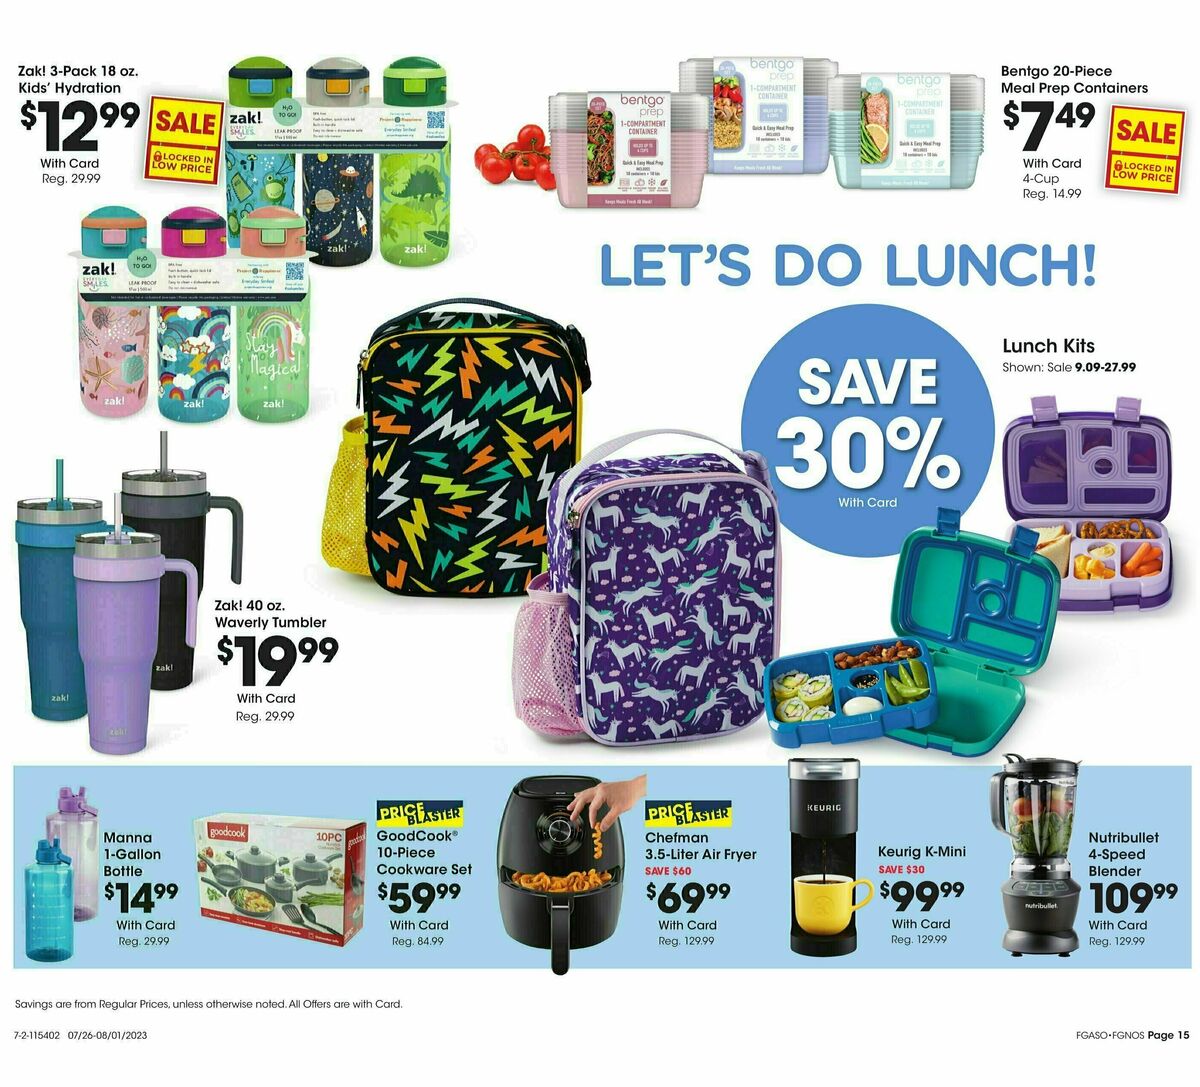 Fred Meyer General Merchandise Weekly Ad from July 26